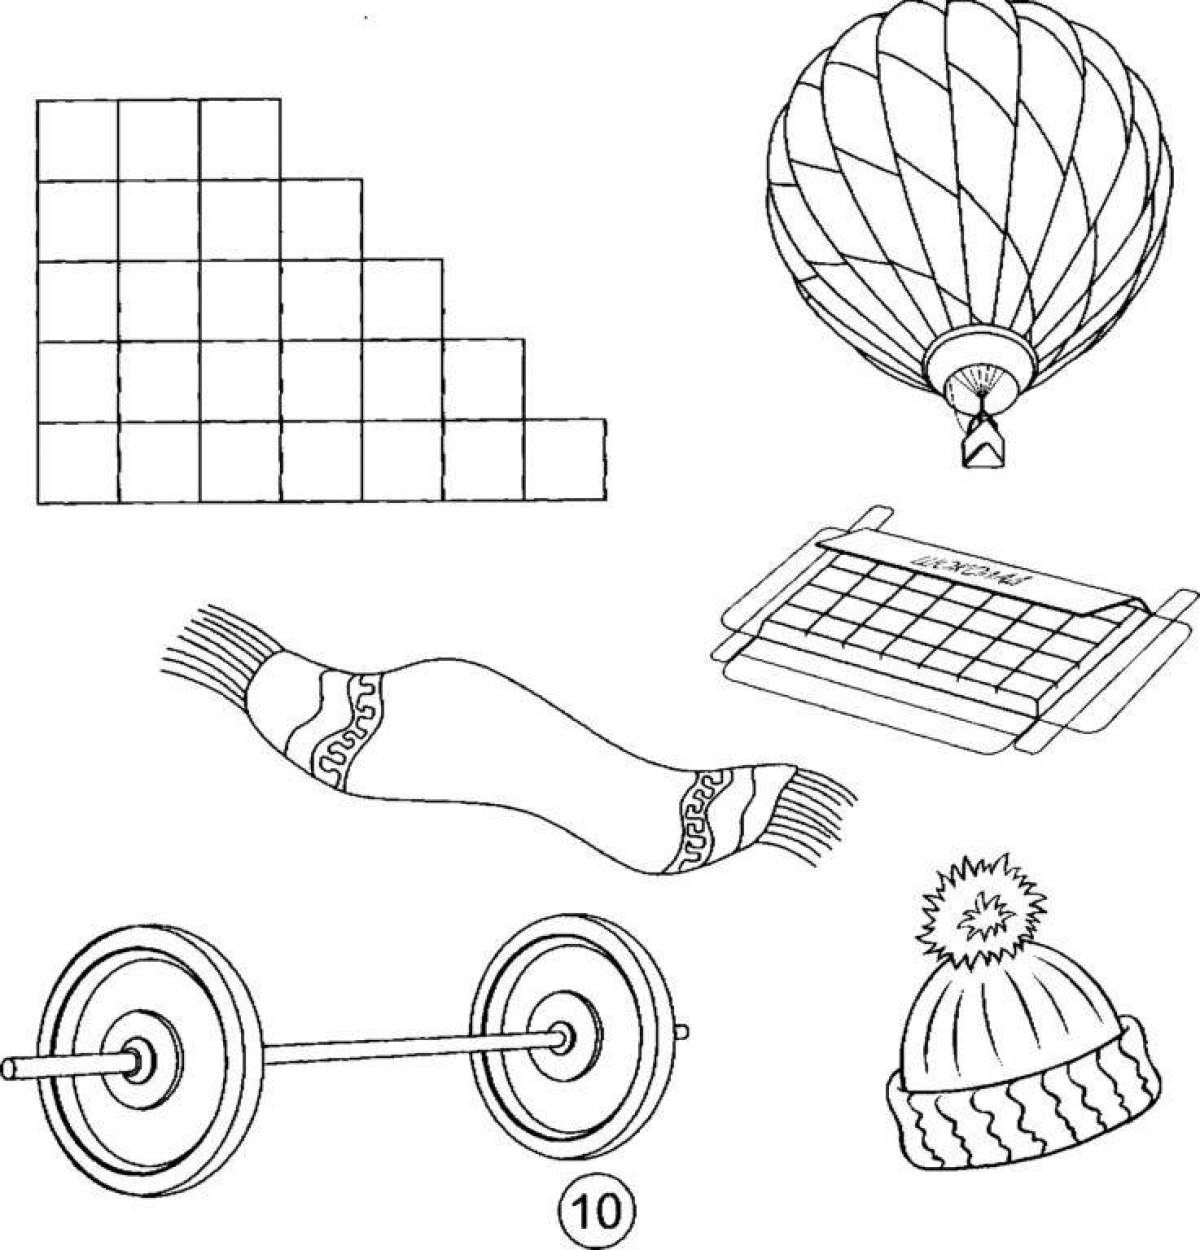 Innovative sh sound coloring page